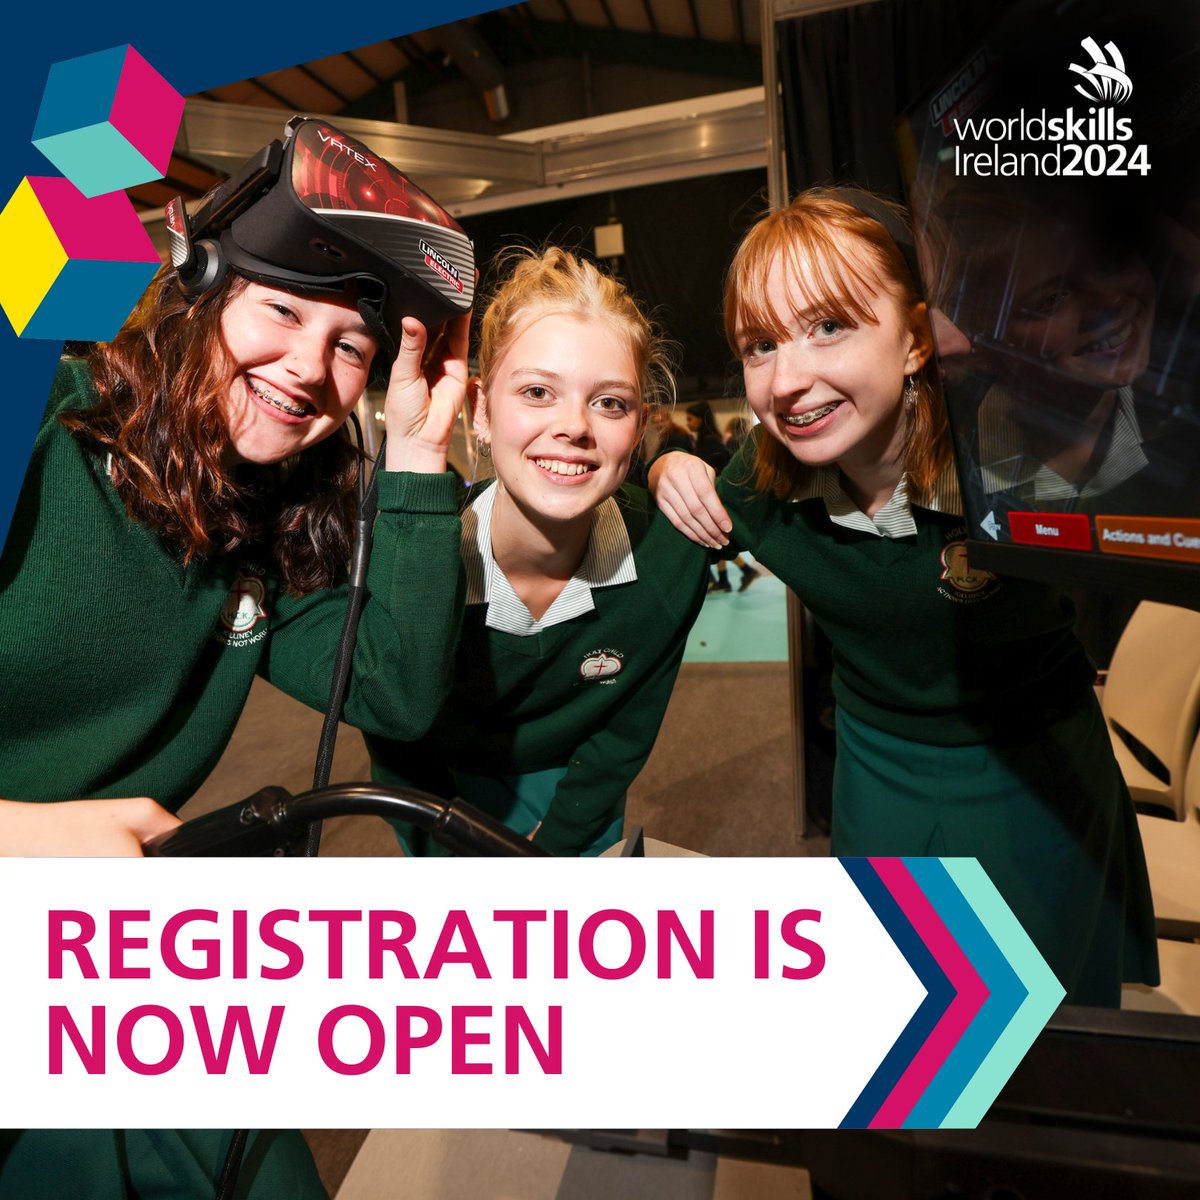 GREAT NEWS 🚨 Registration for WorldSkills Ireland 2024 is now OPEN! Don't forget, group slots book out fast, so register your group now to avoid disappointment! Register here: tinyurl.com/n5vkemms Find out more: tinyurl.com/5y7yjxxc #WSI2024